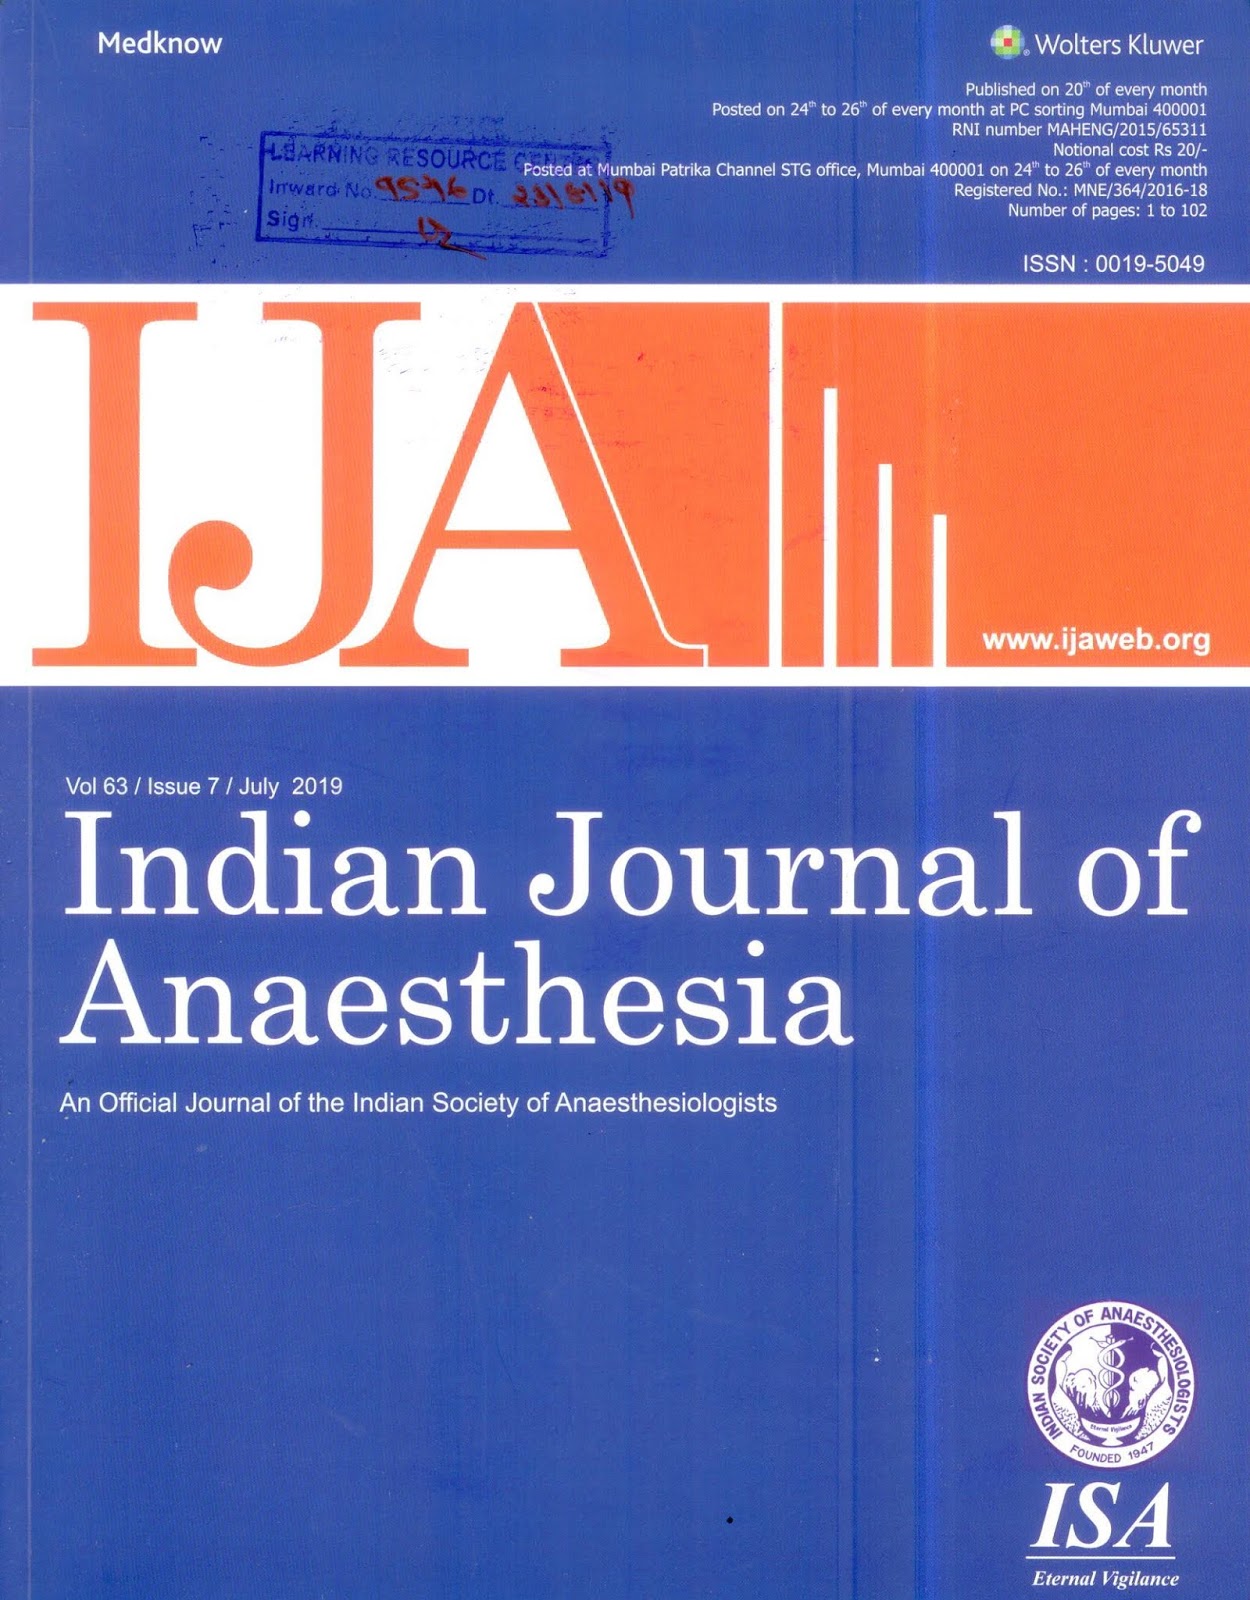 http://www.ijaweb.org/showBackIssue.asp?issn=0019-5049;year=2019;volume=63;issue=7;month=July